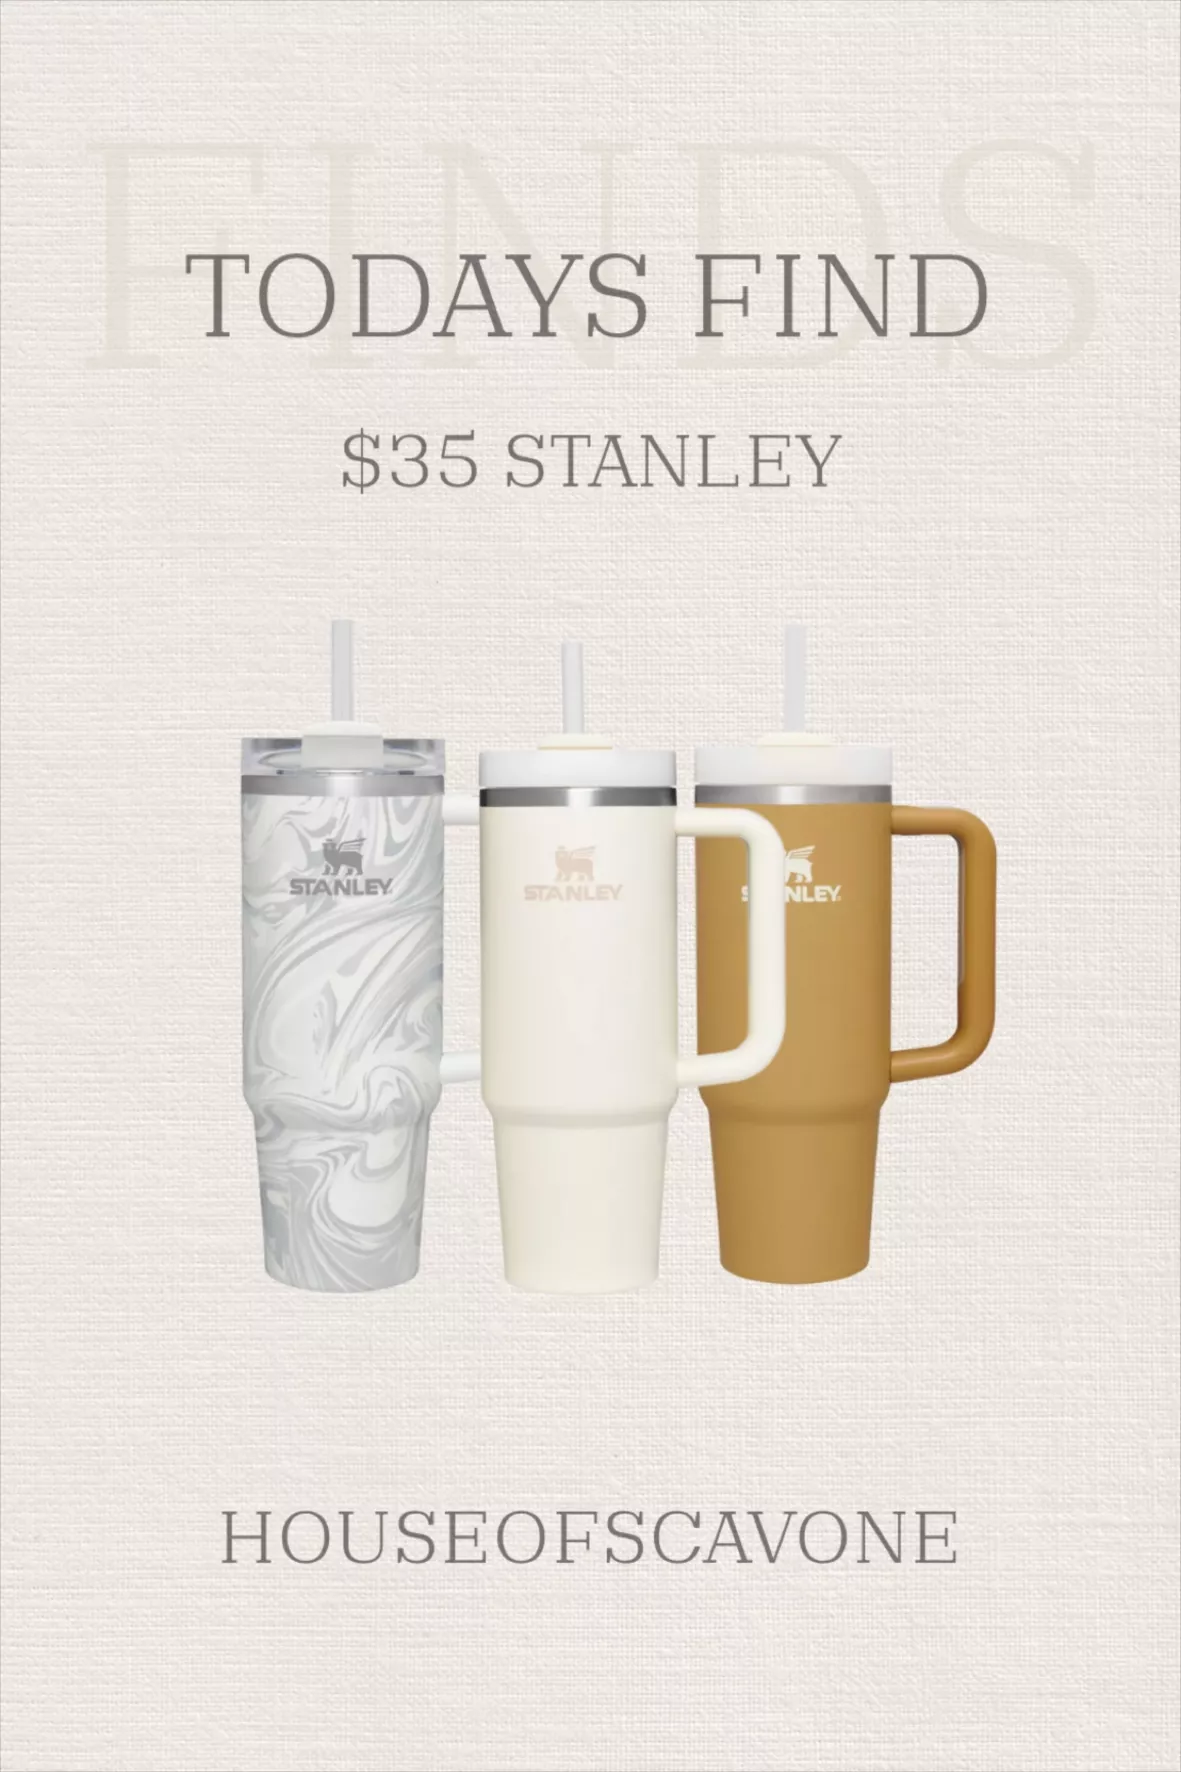 Stanley Accessories curated on LTK